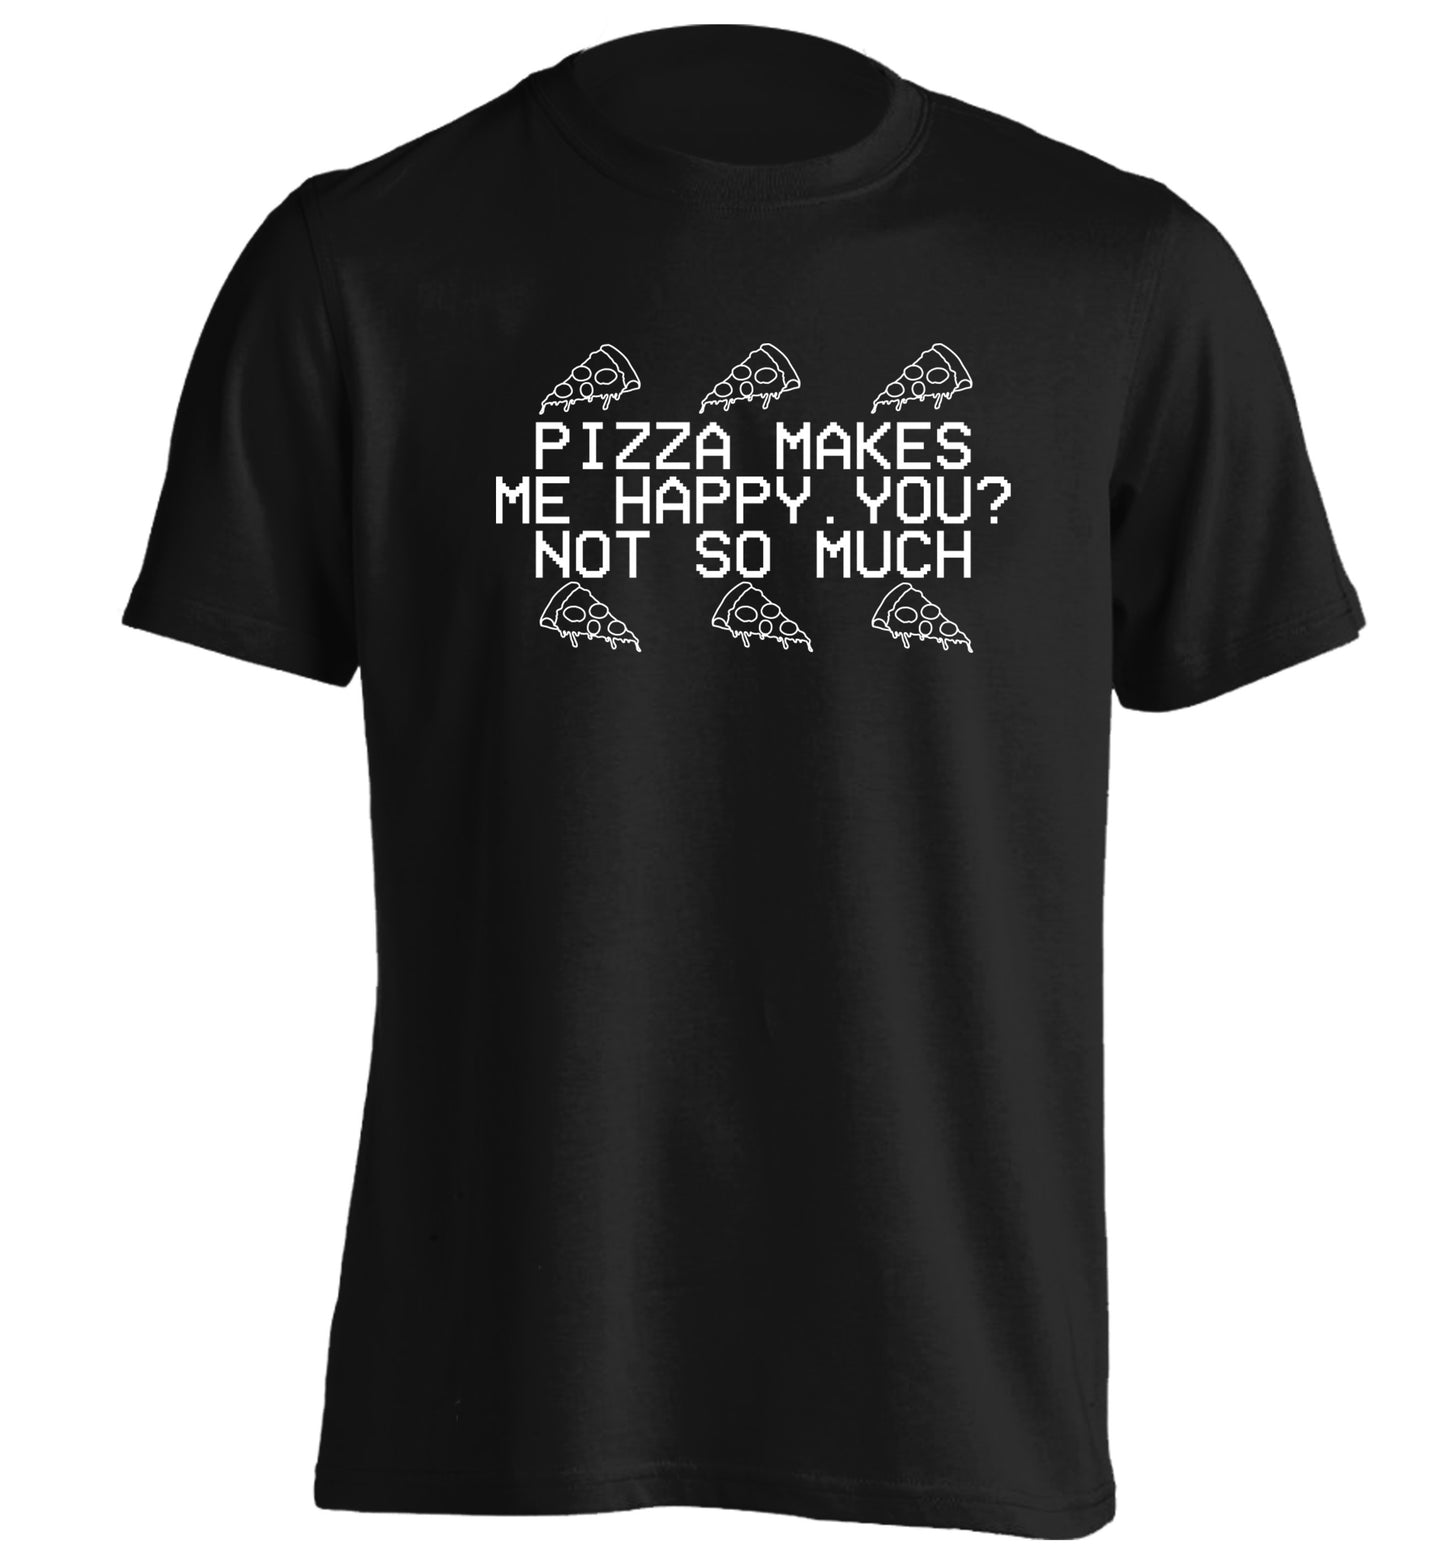 Pizza makes me happy, You? Not so much adults unisex black Tshirt 2XL